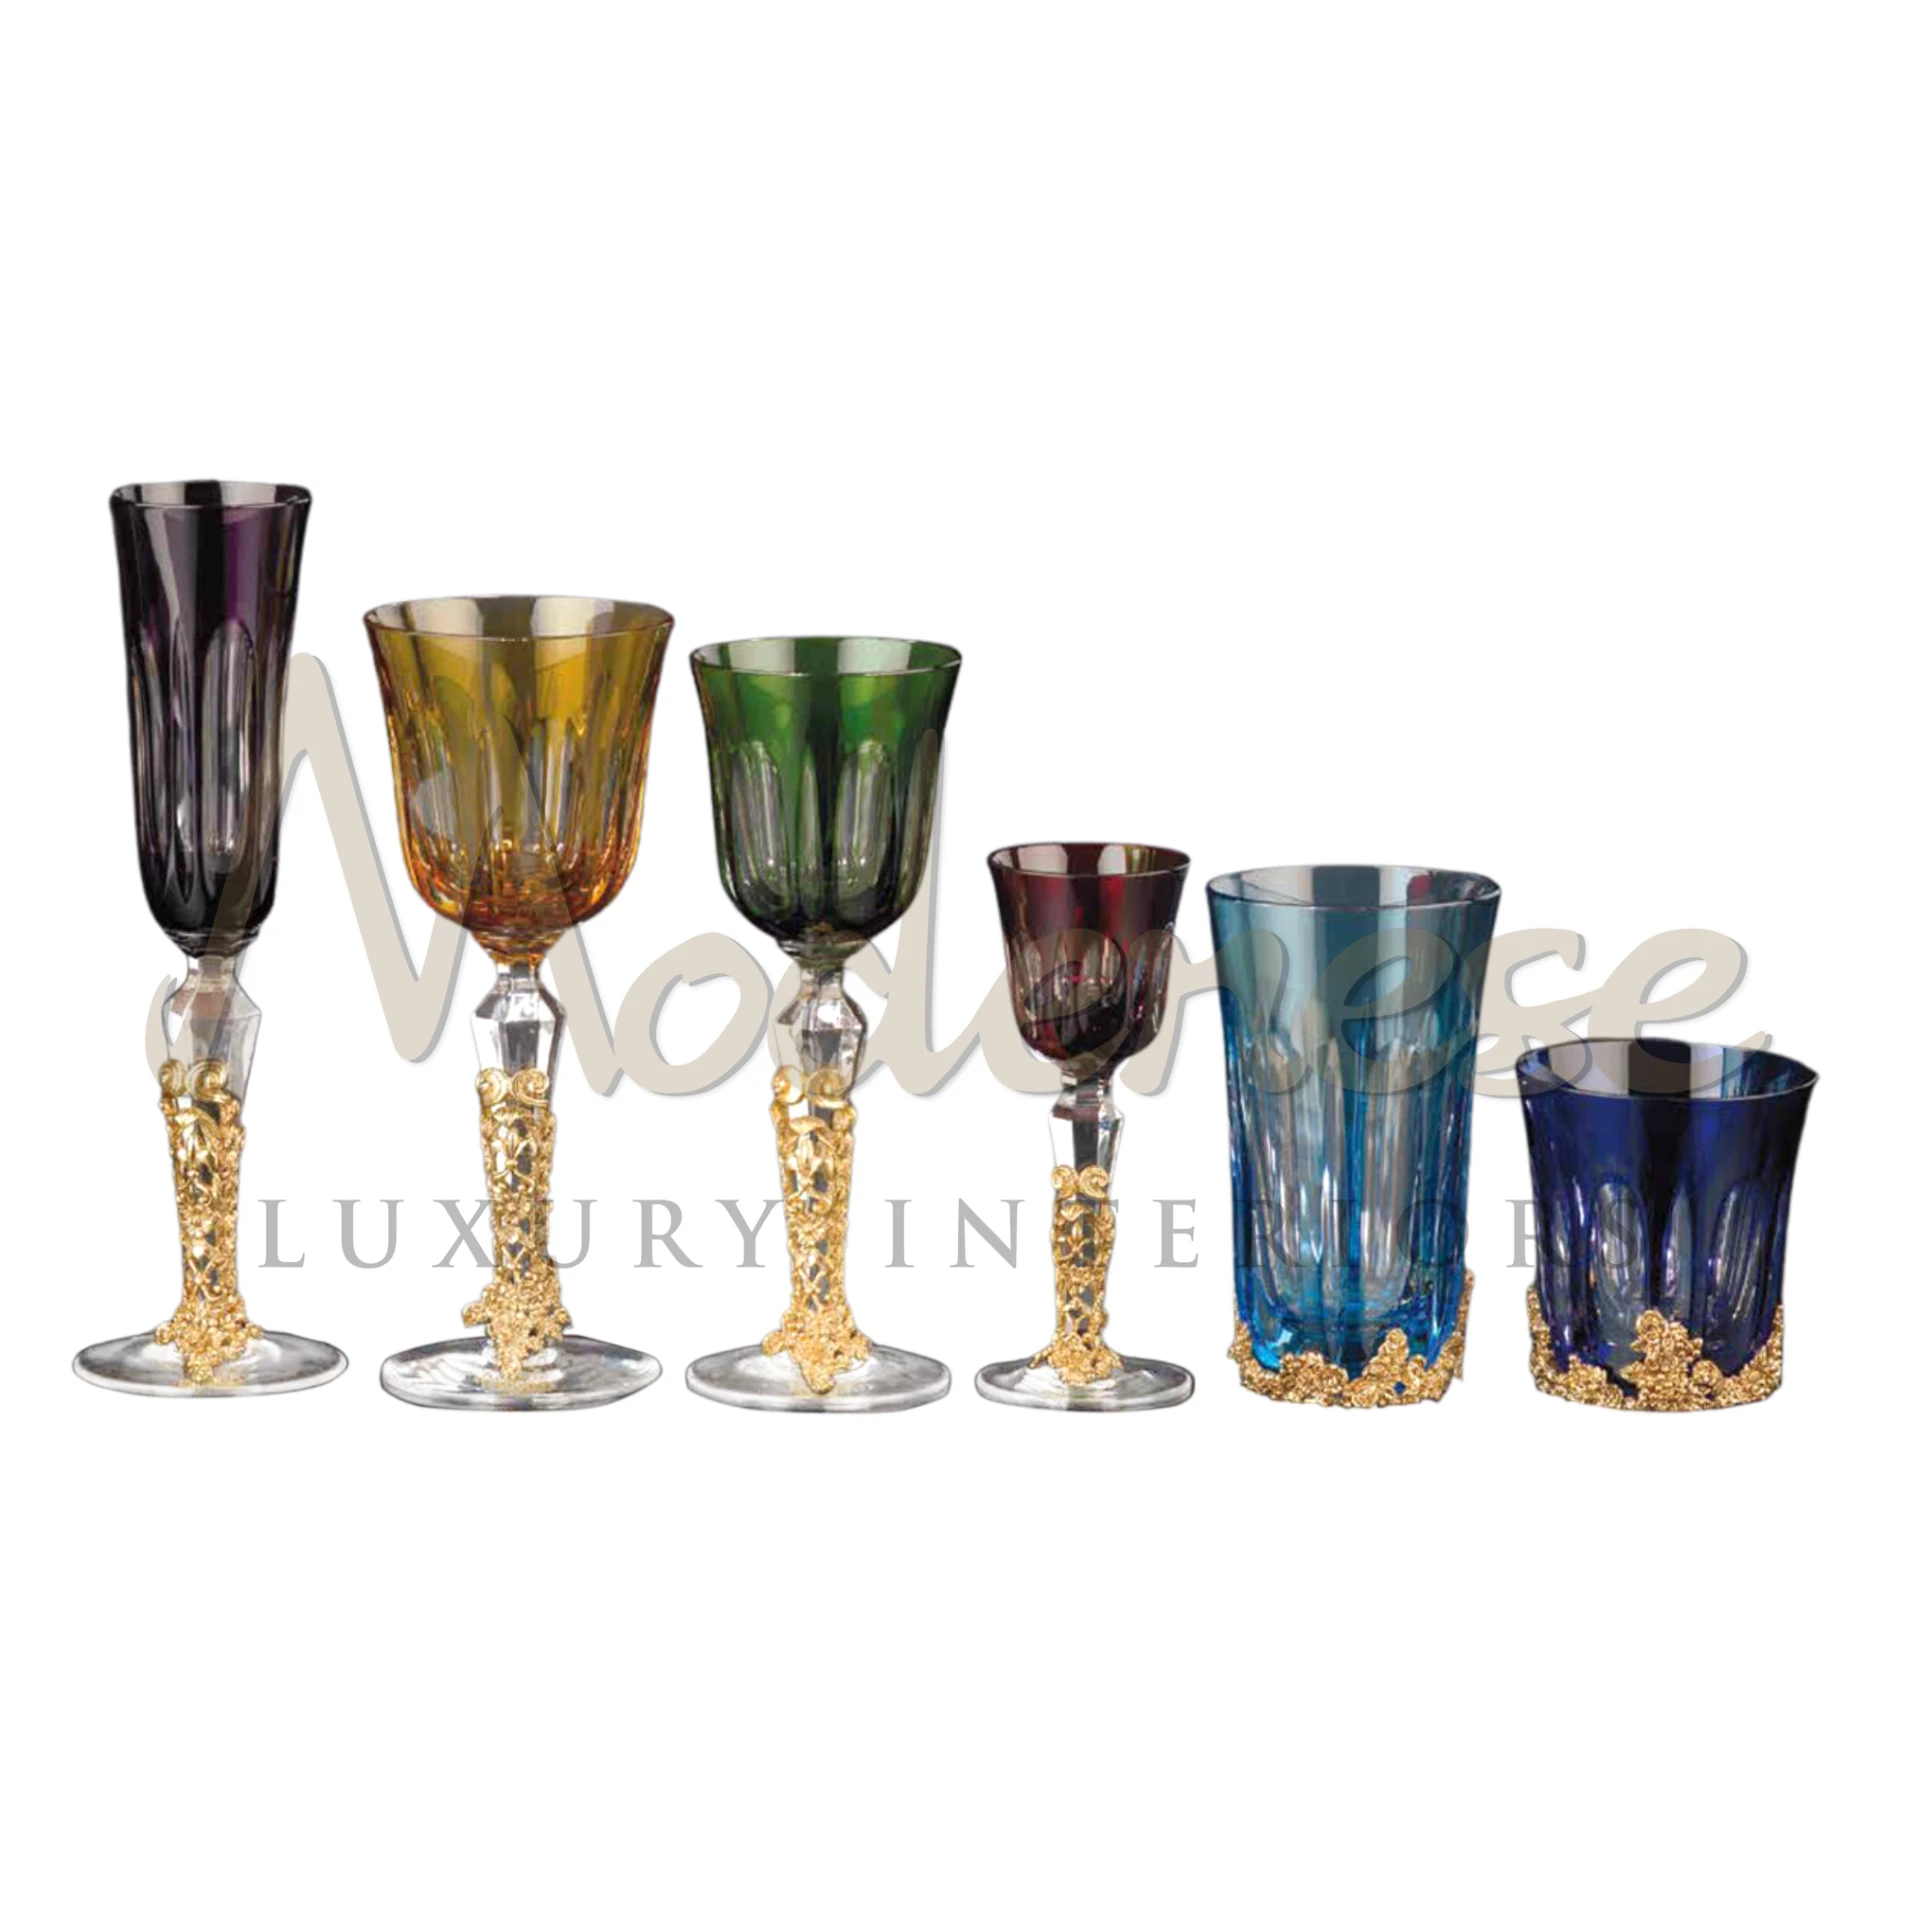 A collection of Royal Glasses Set in various colors and sizes